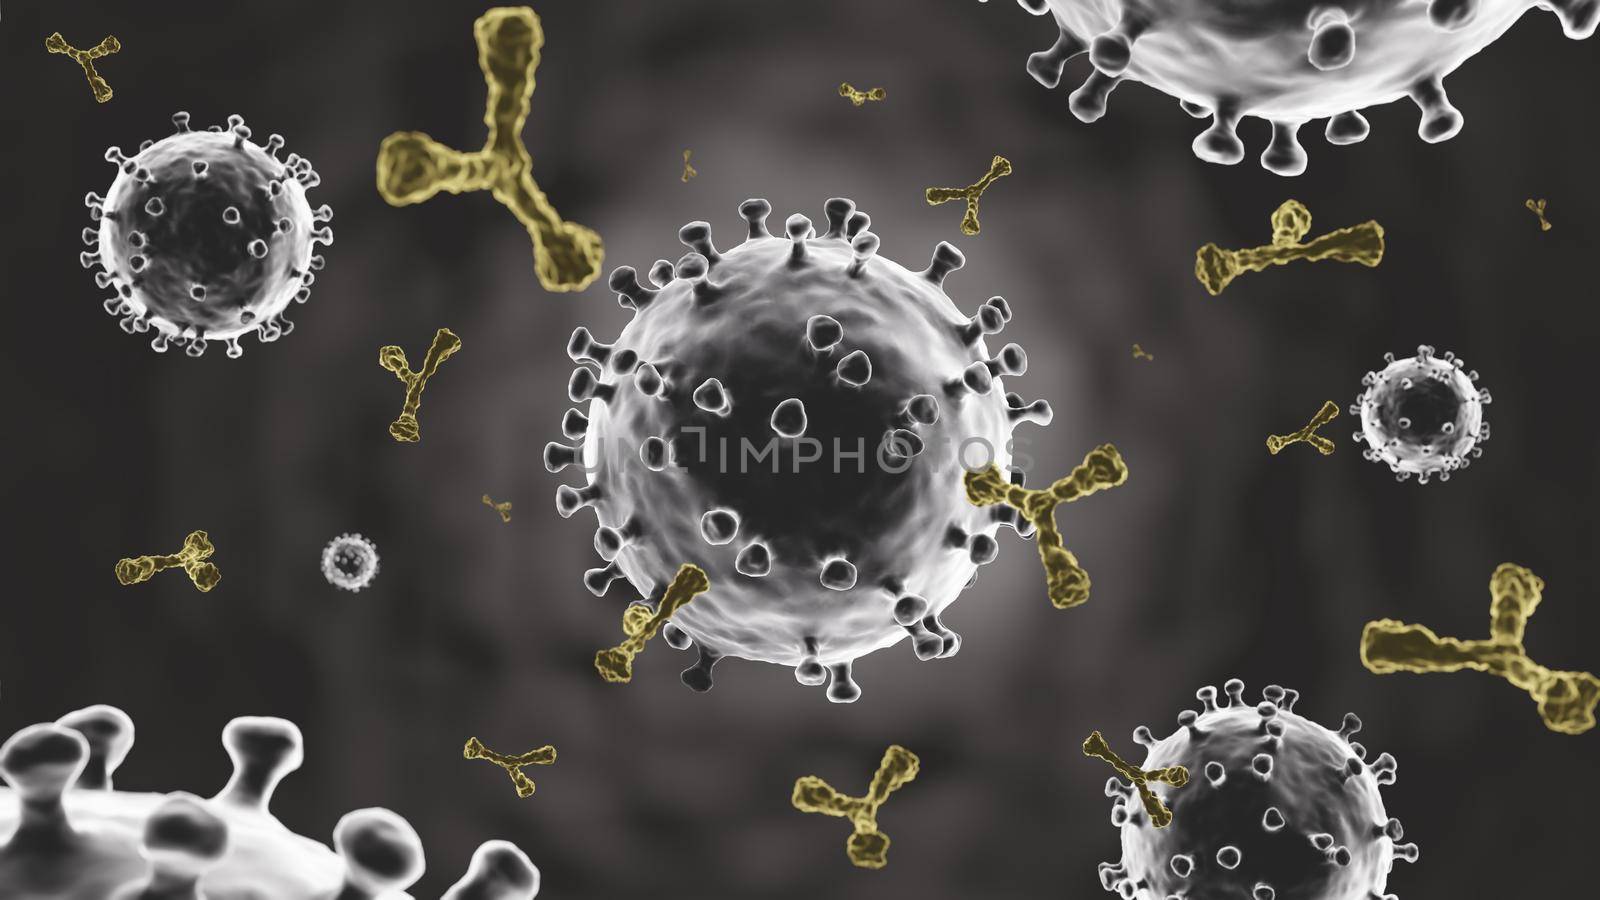 Coronavirus and antibody molecule from antiviral vaccine injection . Dark vignette background . Microscopic view of virus cell . 3D rendering .